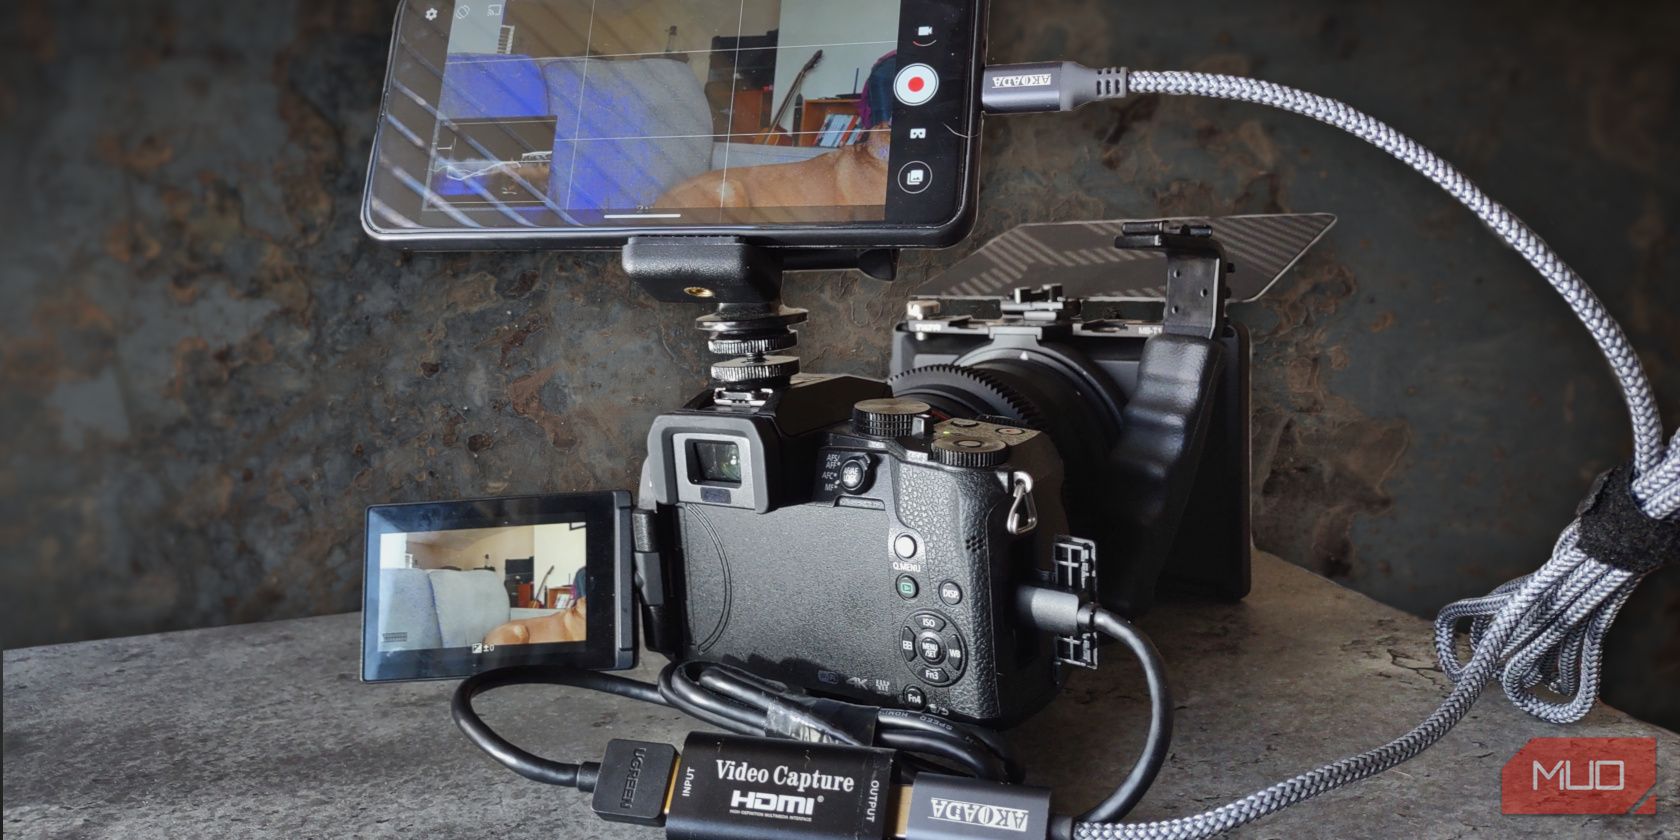 Using an Android phone as a monitor for a mirrorless Lumix G7 camera